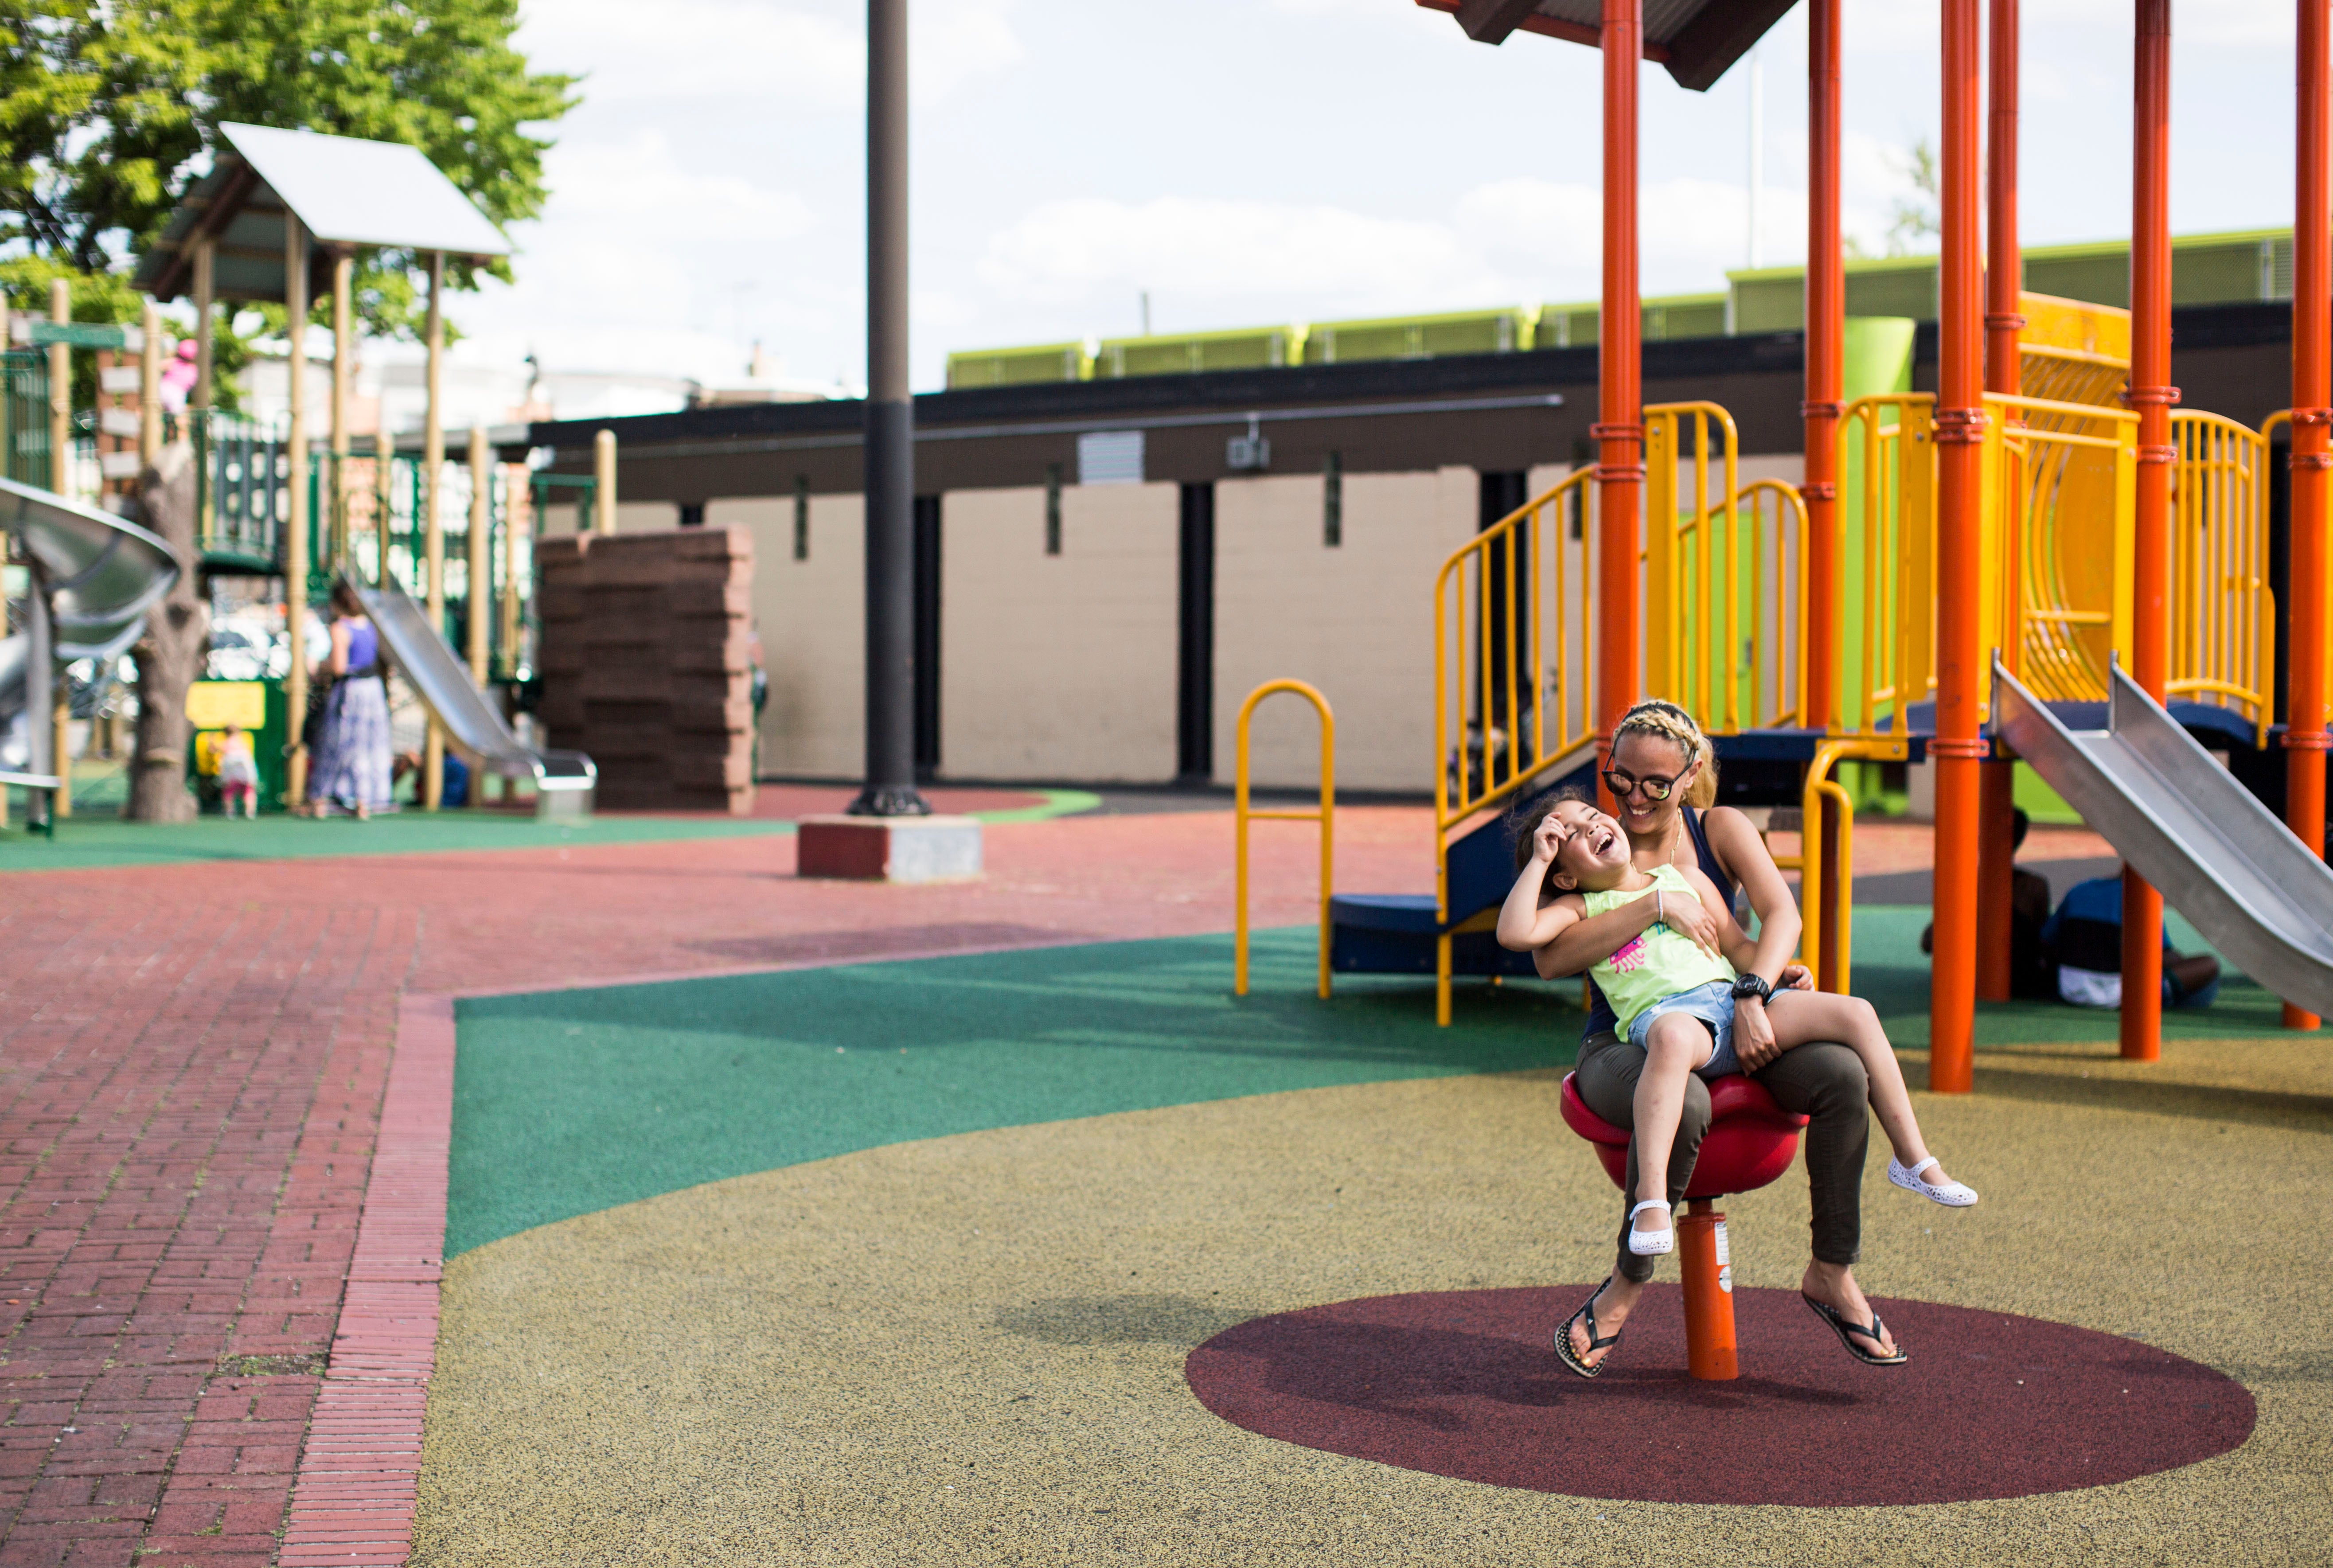 </b> Savannah Zayas and her daughter Layla play at Cione Playground in Kensington on June 29, 2016. Savannah doesn't take Layla to parks in her own neighborhood. (Jessica Kourkounis)